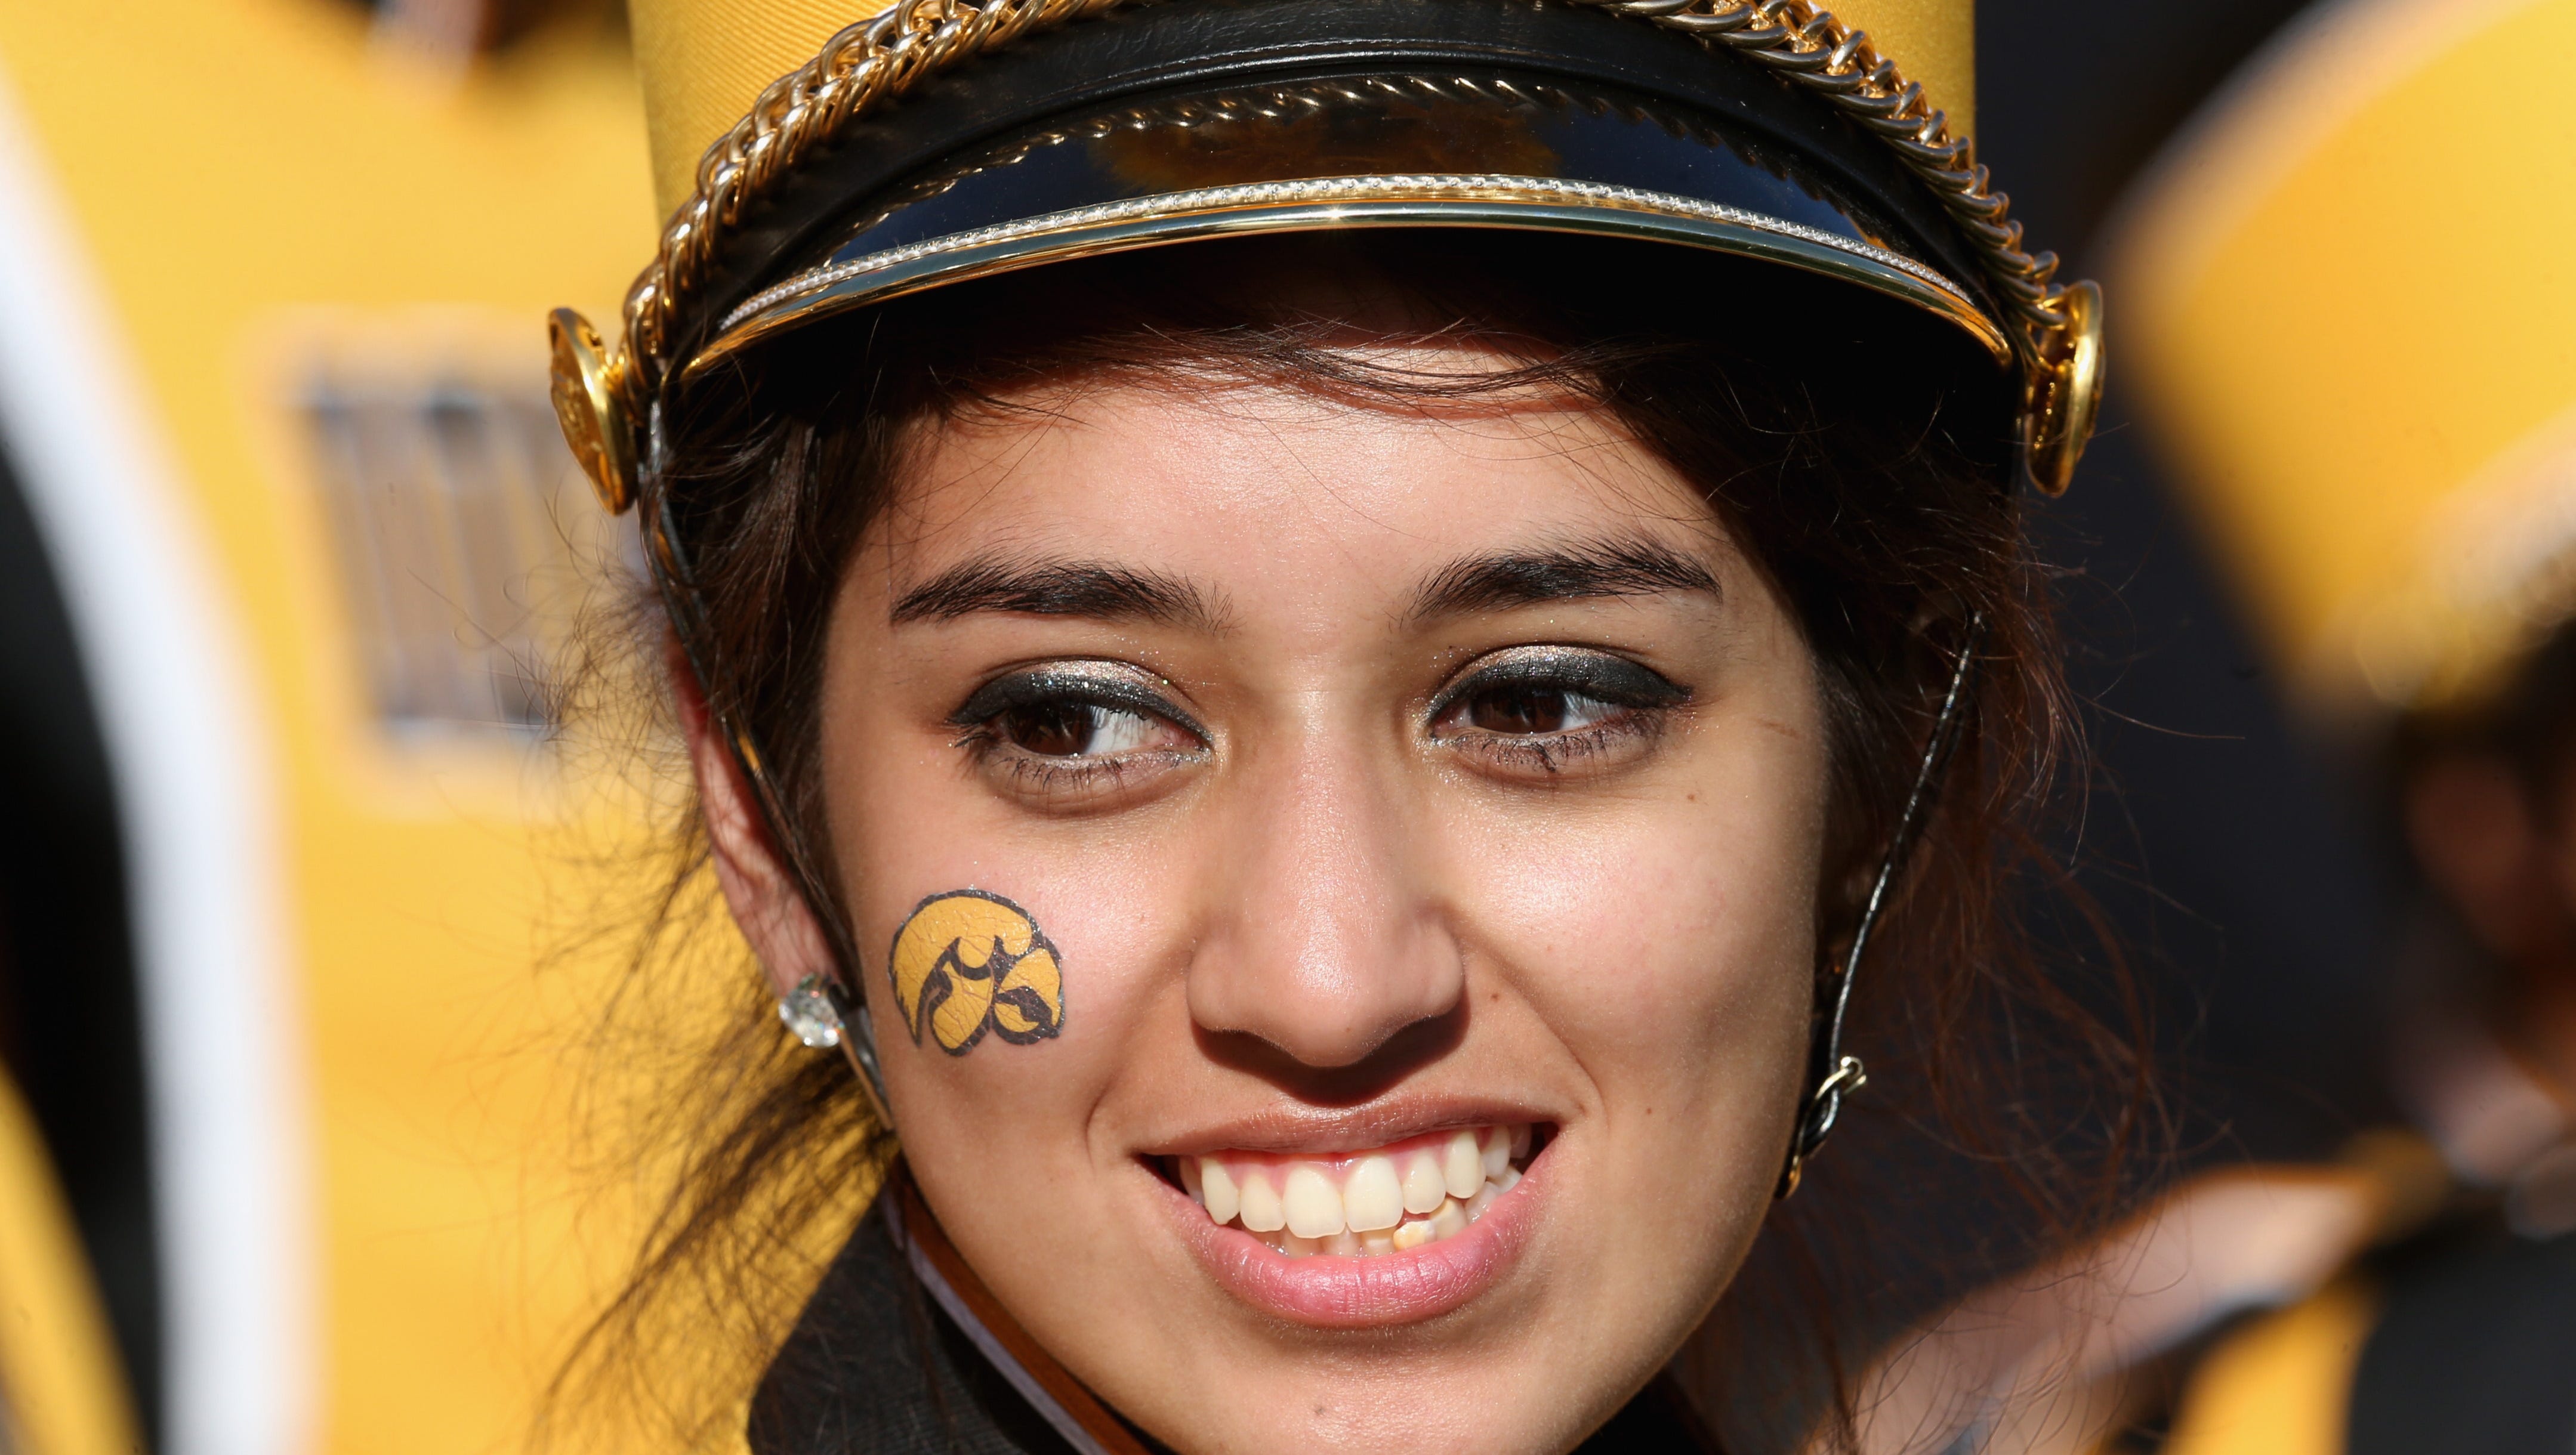 A band member from Iowa smiles before the 102nd Rose Bowl Game between the Iowa Hawkeyes and the Stanford Cardinal on January 1, 2016 at the Rose Bowl in Pasadena, California.